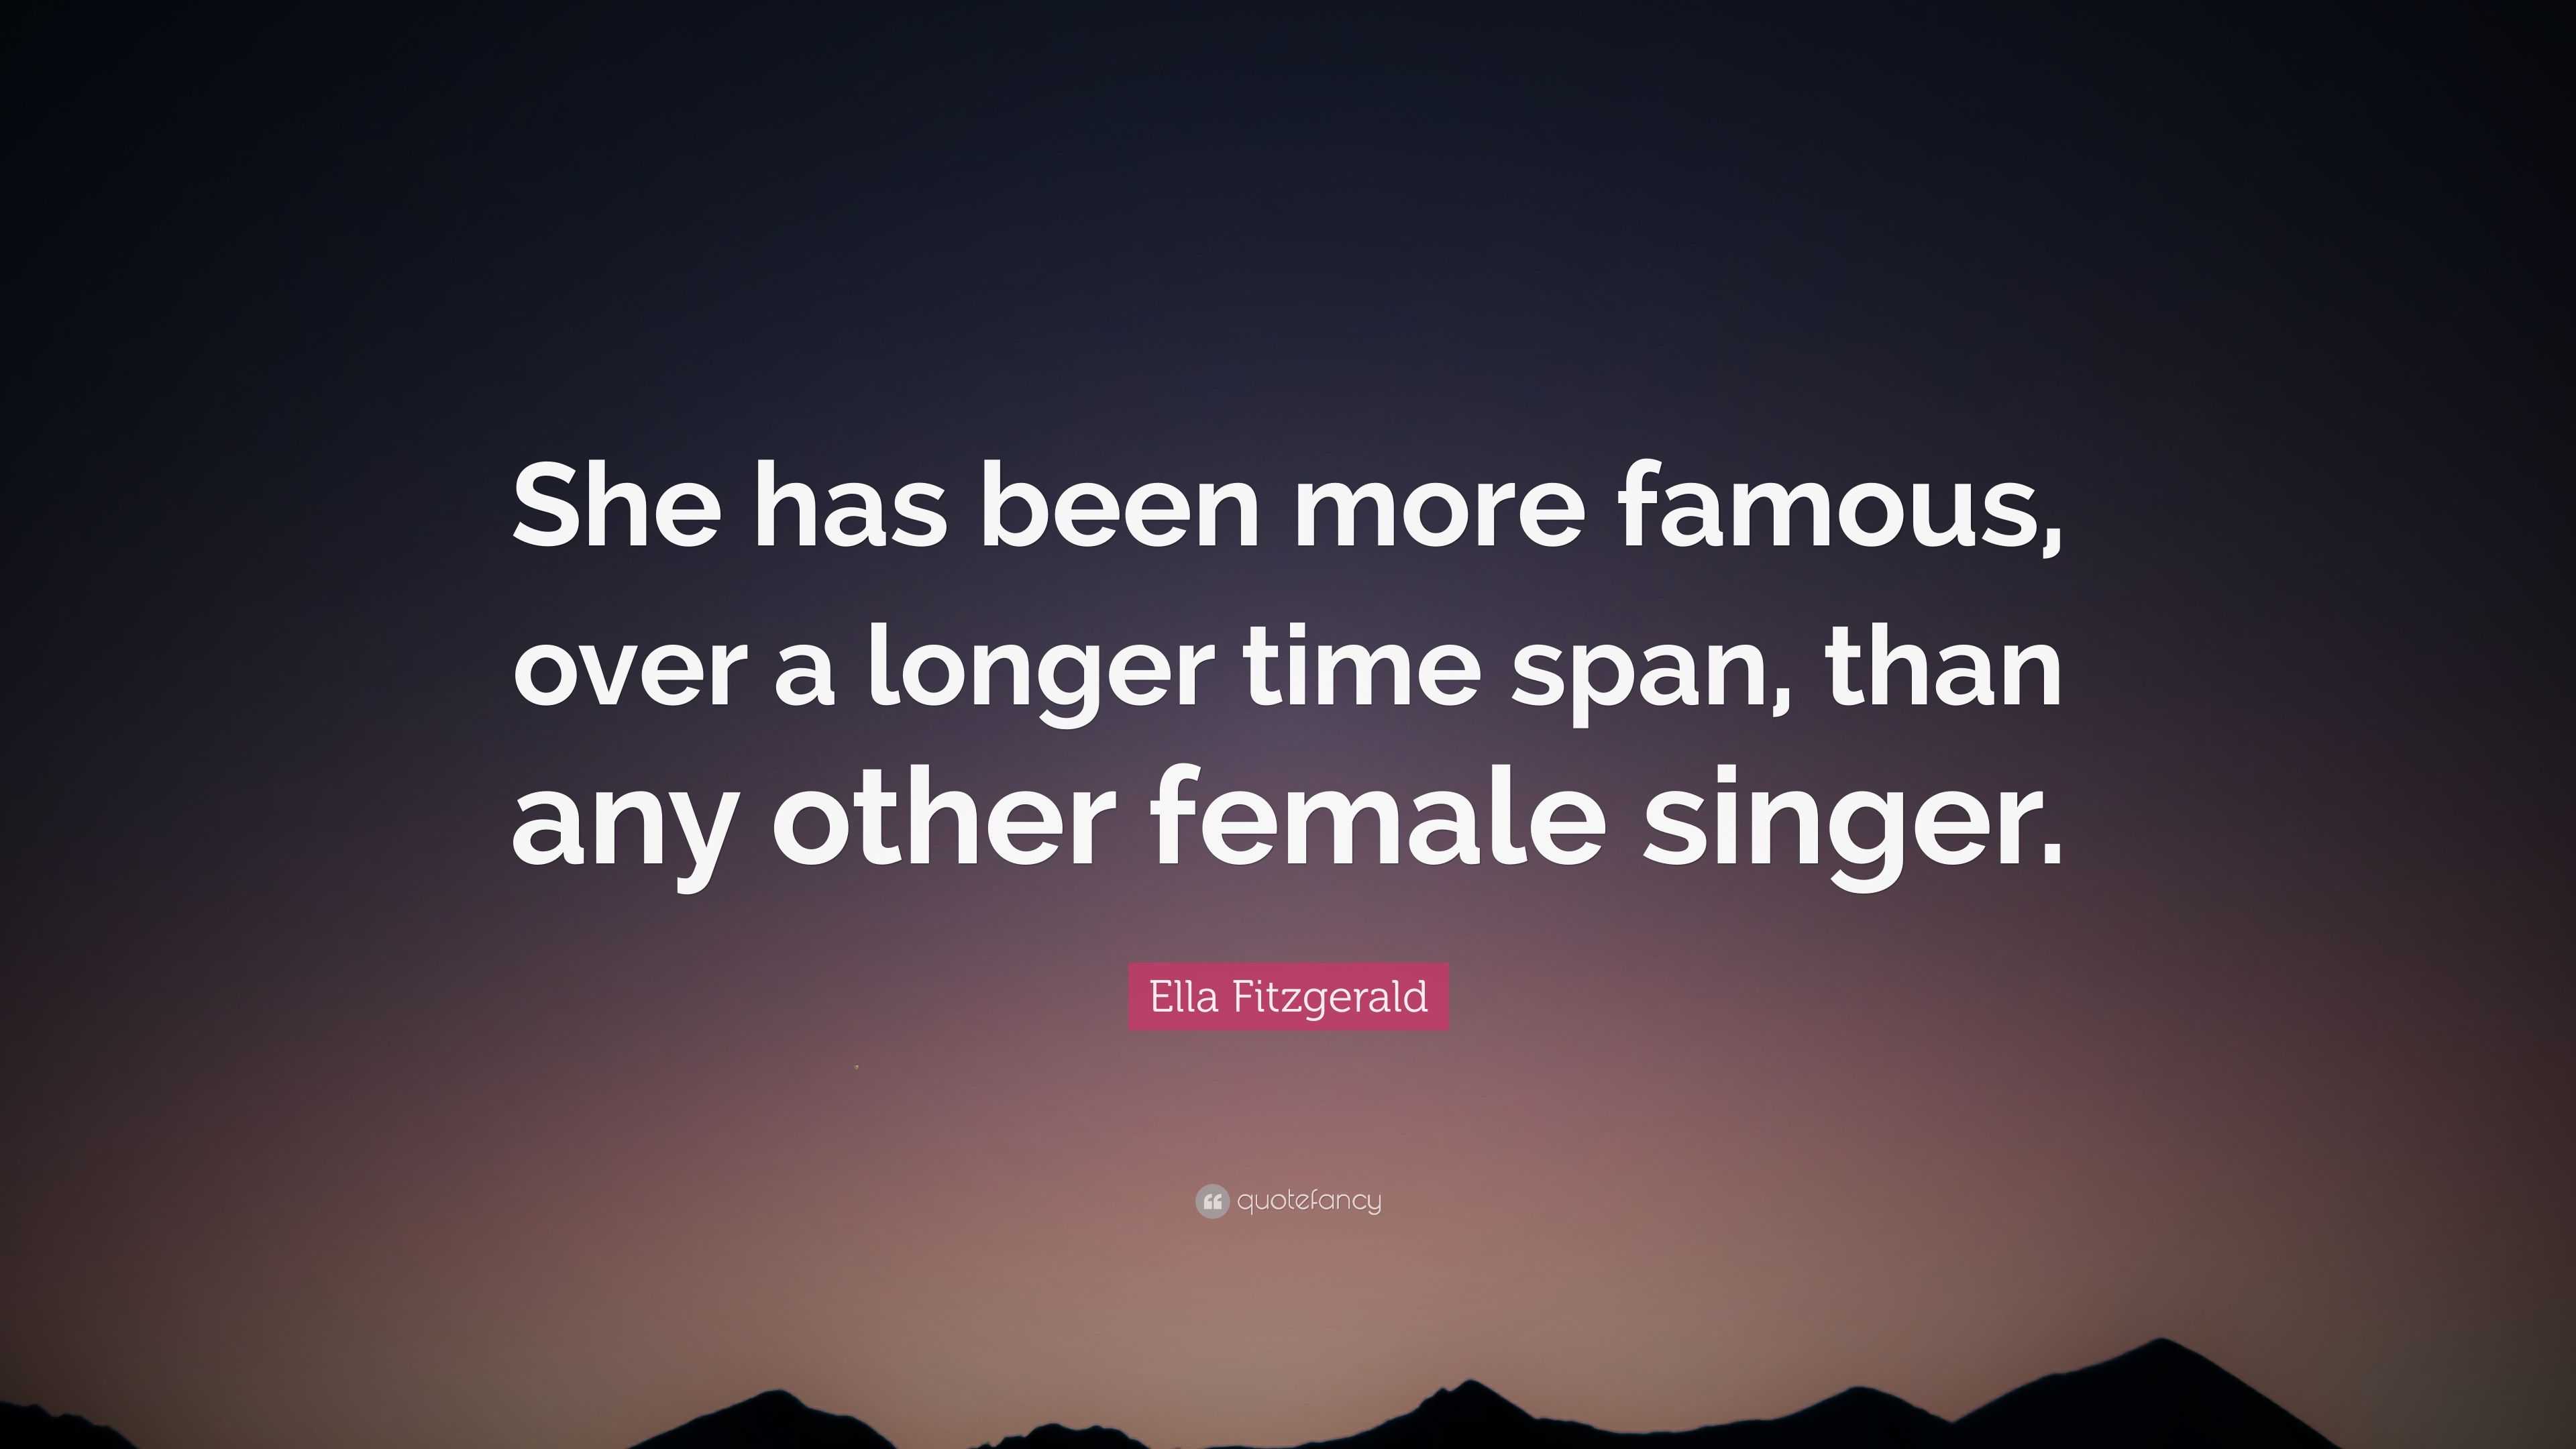 Ella Fitzgerald Quote: “She has been more famous, over a longer time ...